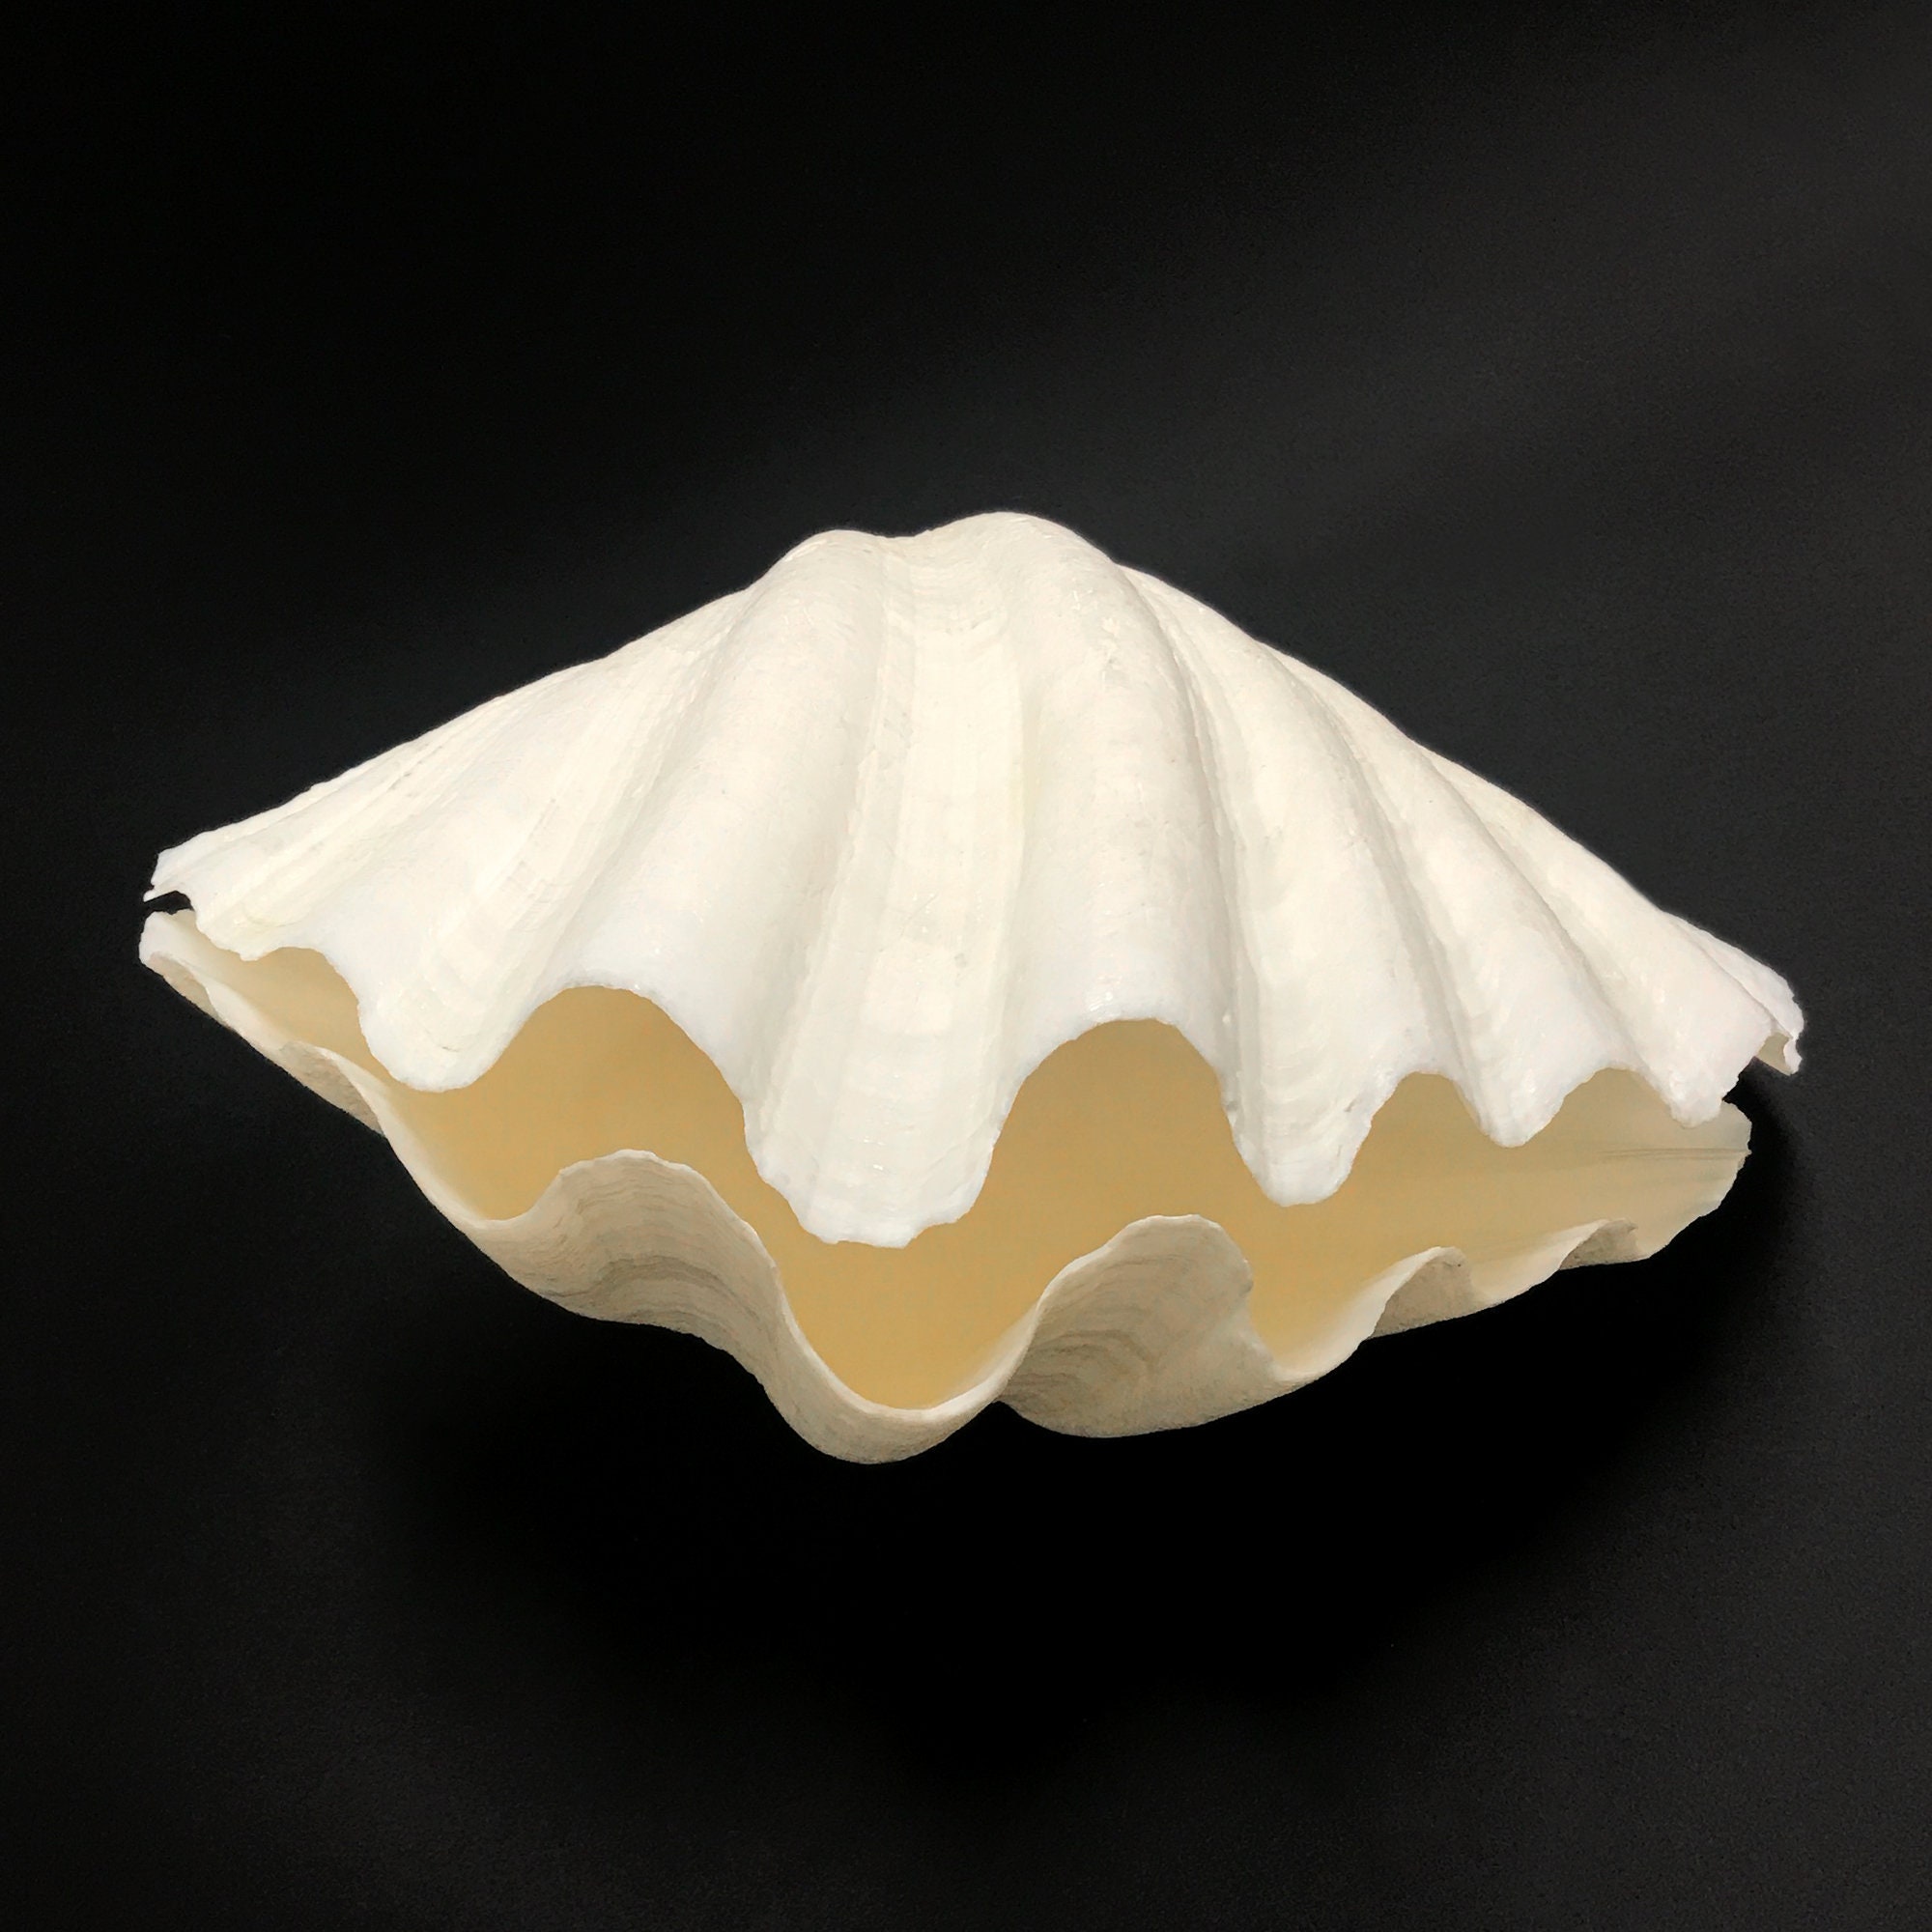 Extra Large Giant Clam Shell MATCHING PAIR Very Very Rare Unique Real  Complete Sea Shell Decorative Display Specimen Free USA Shipping -   Canada